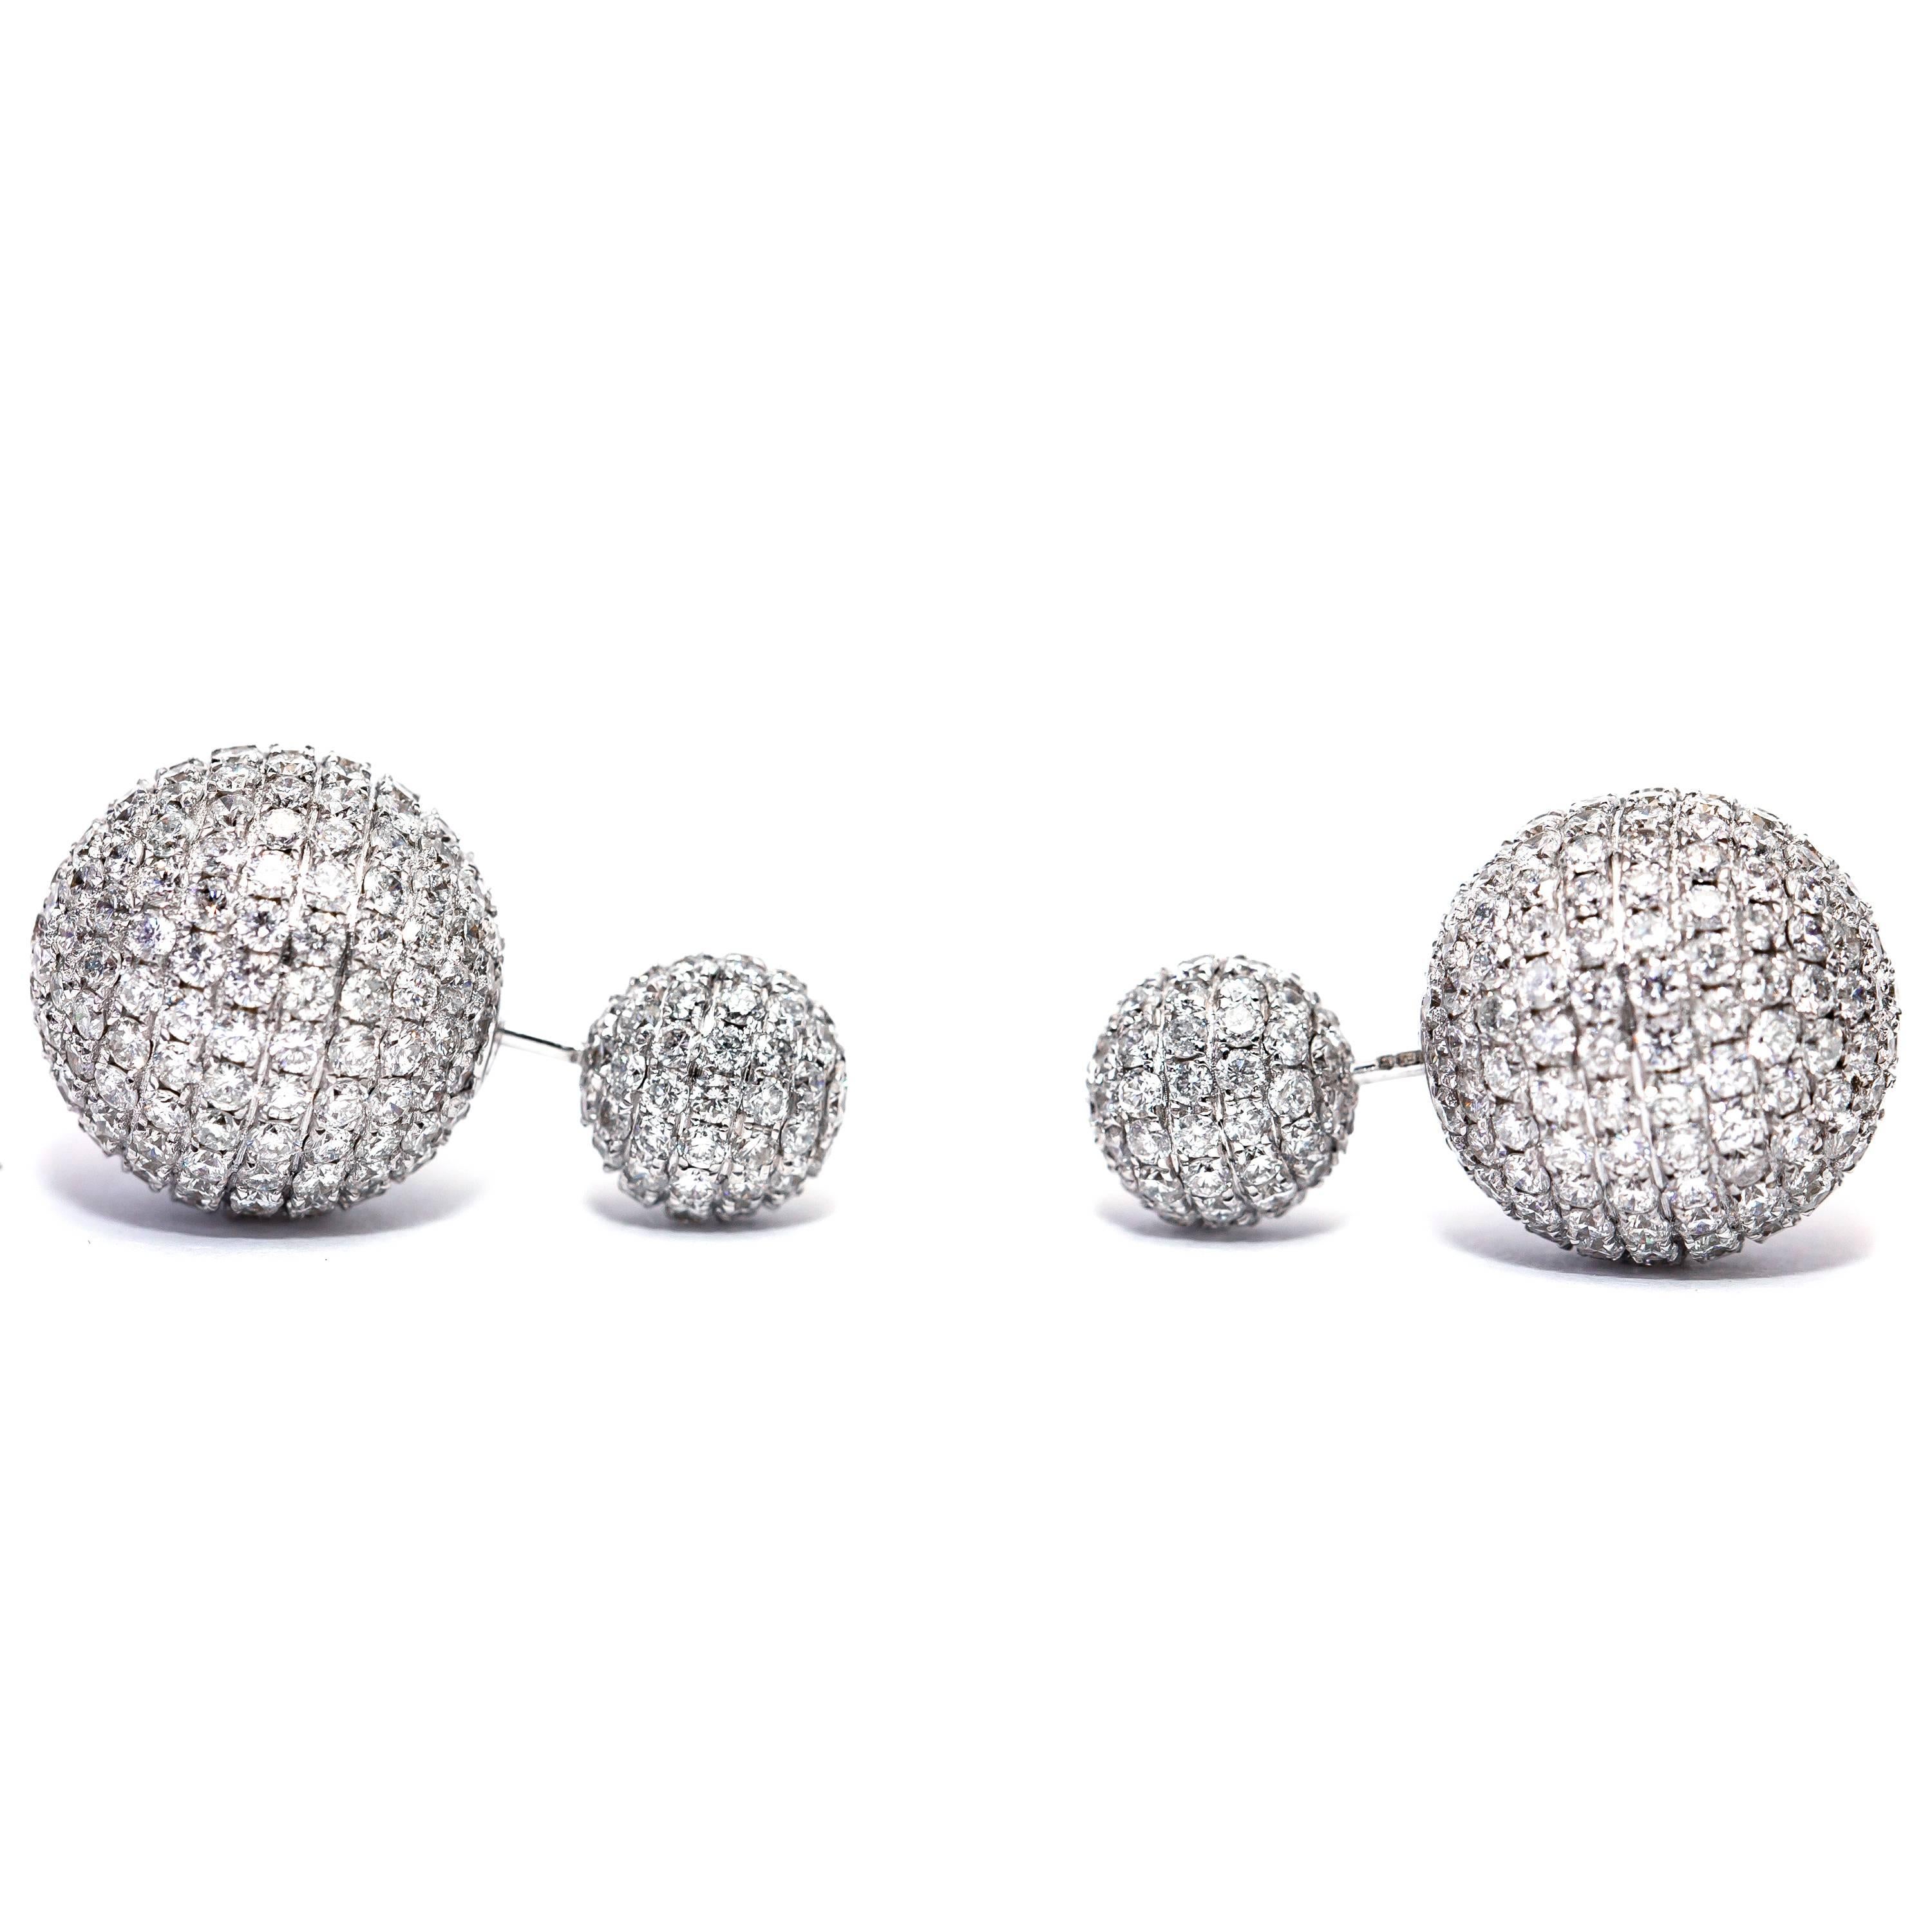 This stunning Double Sphere Earrings magnificently set with 8.50 Carat of Micro Pave Set Color H Clarity SI White Round Brilliant Diamonds. A truly spectacular piece set in 18 Karat White Gold. British Hallmarked.

